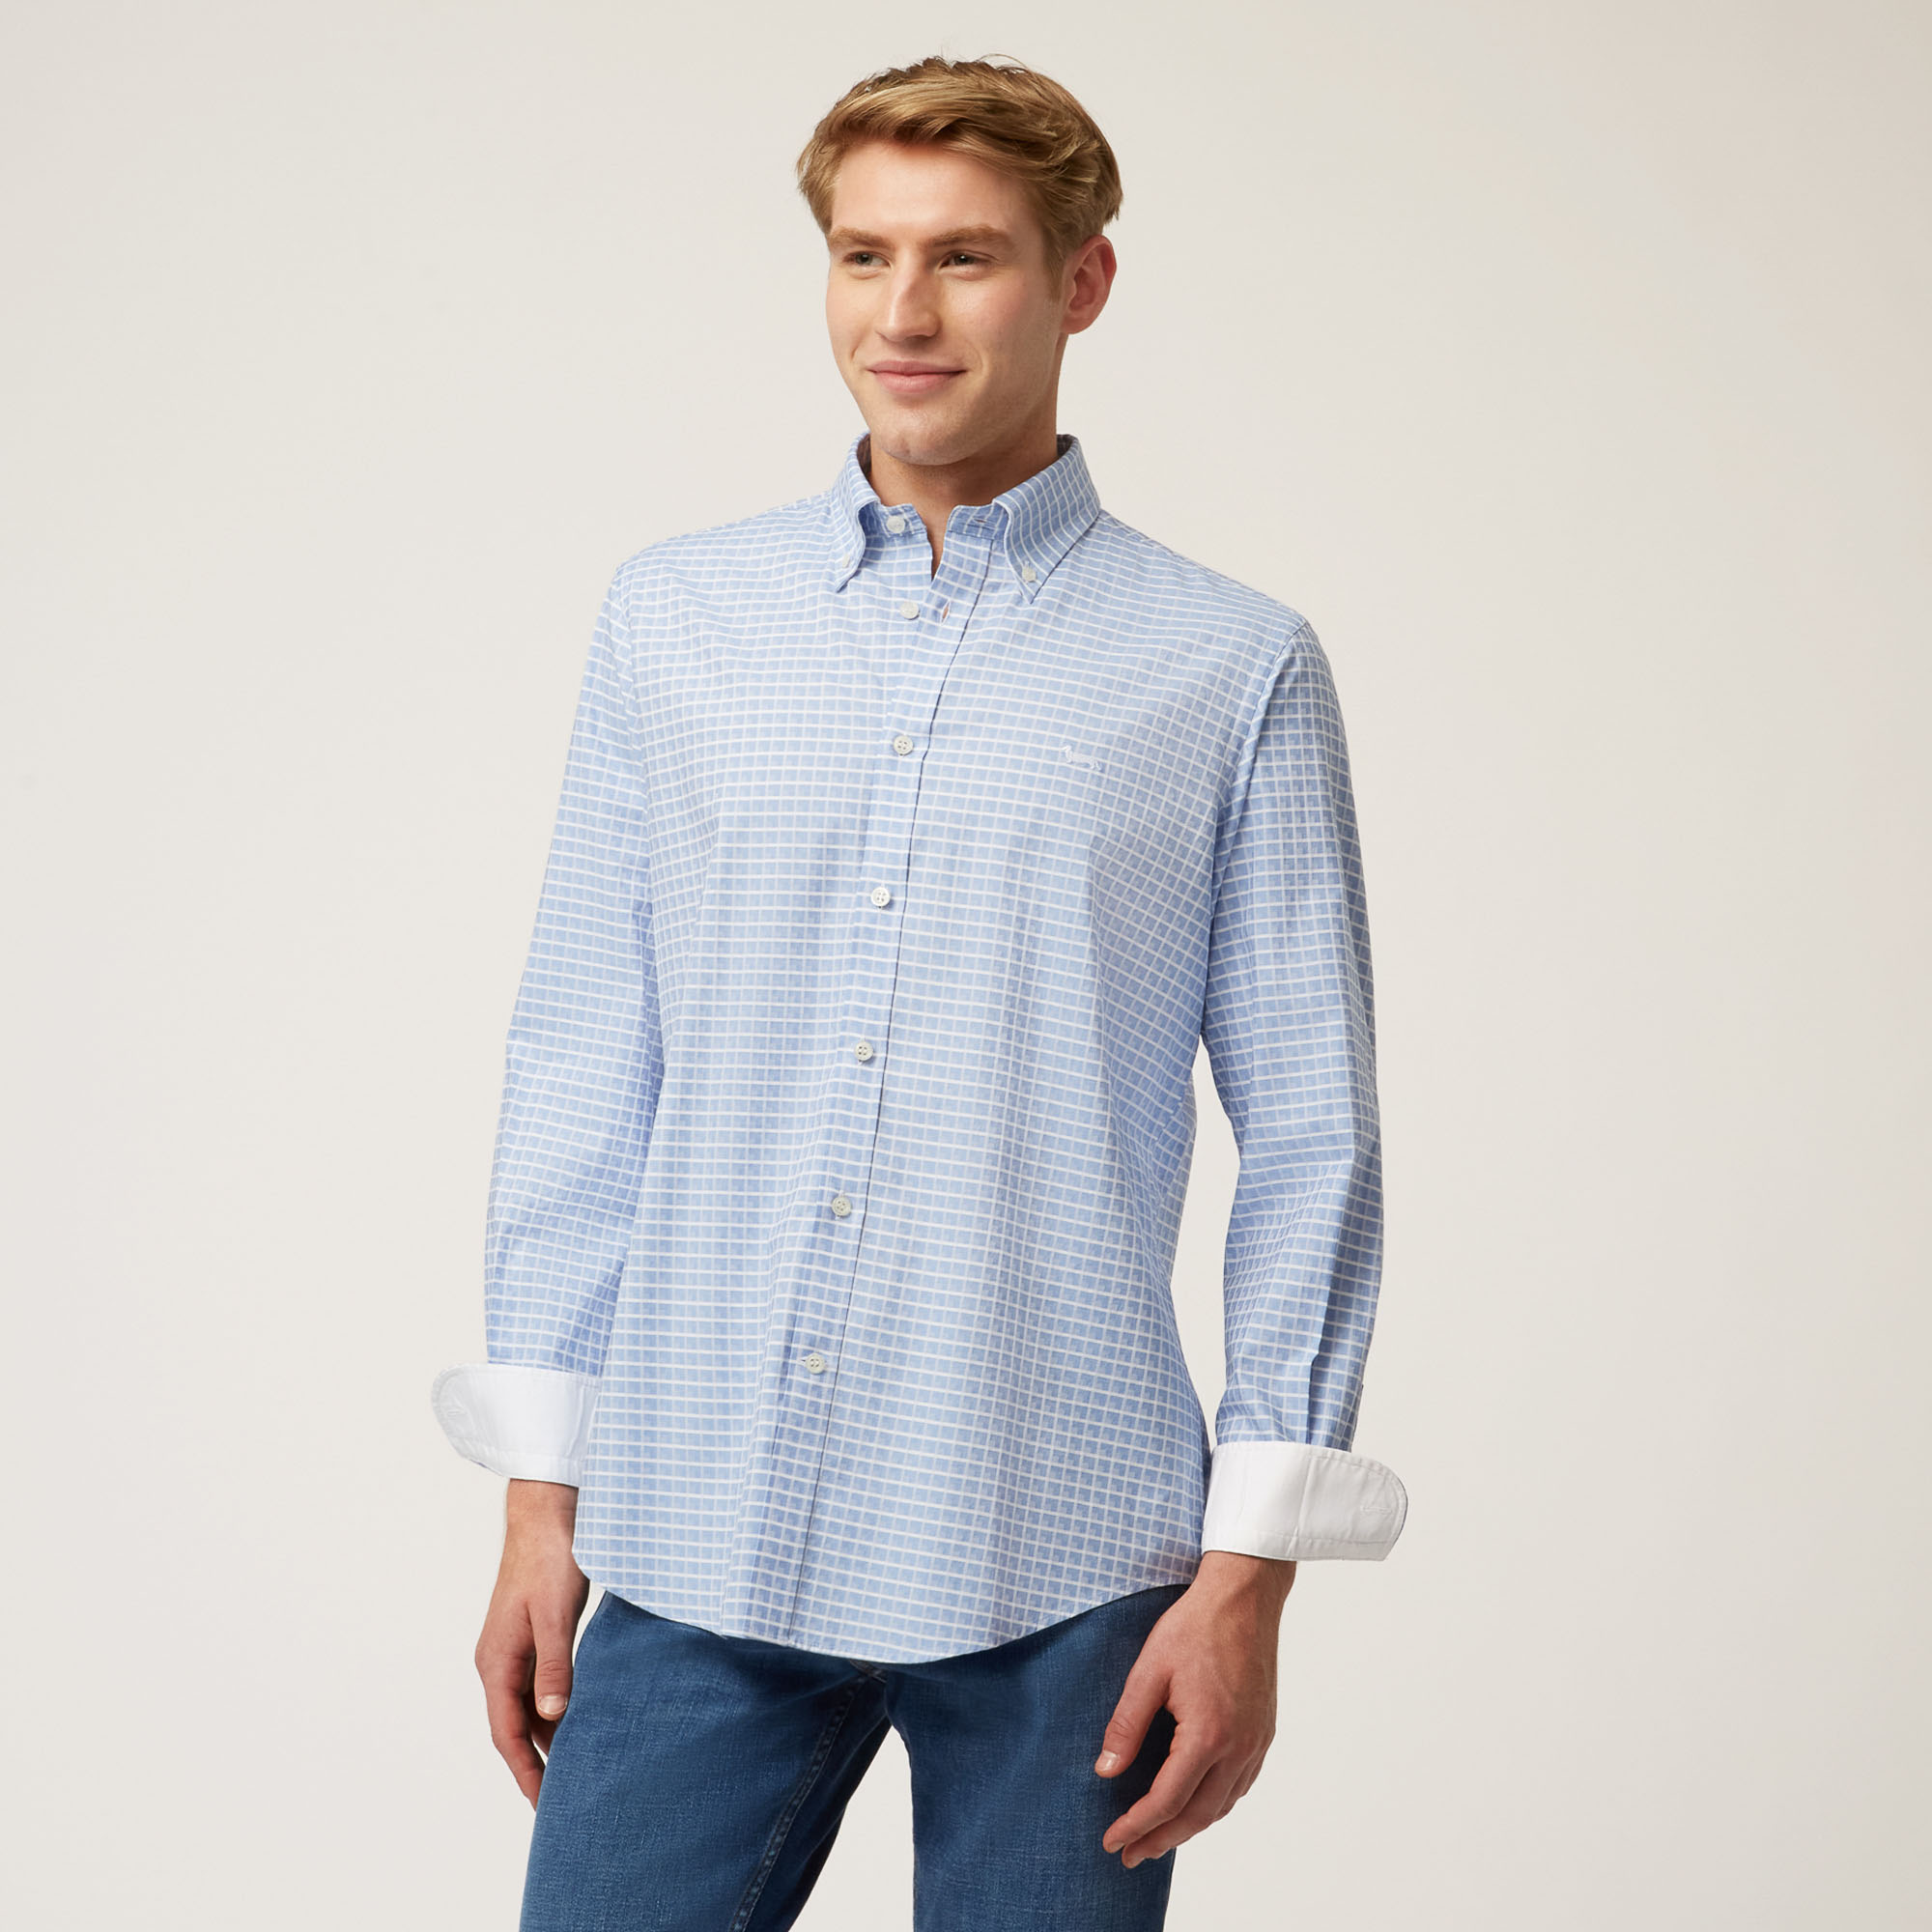 Cotton And Lyocell Check Shirt, Light Blue, large